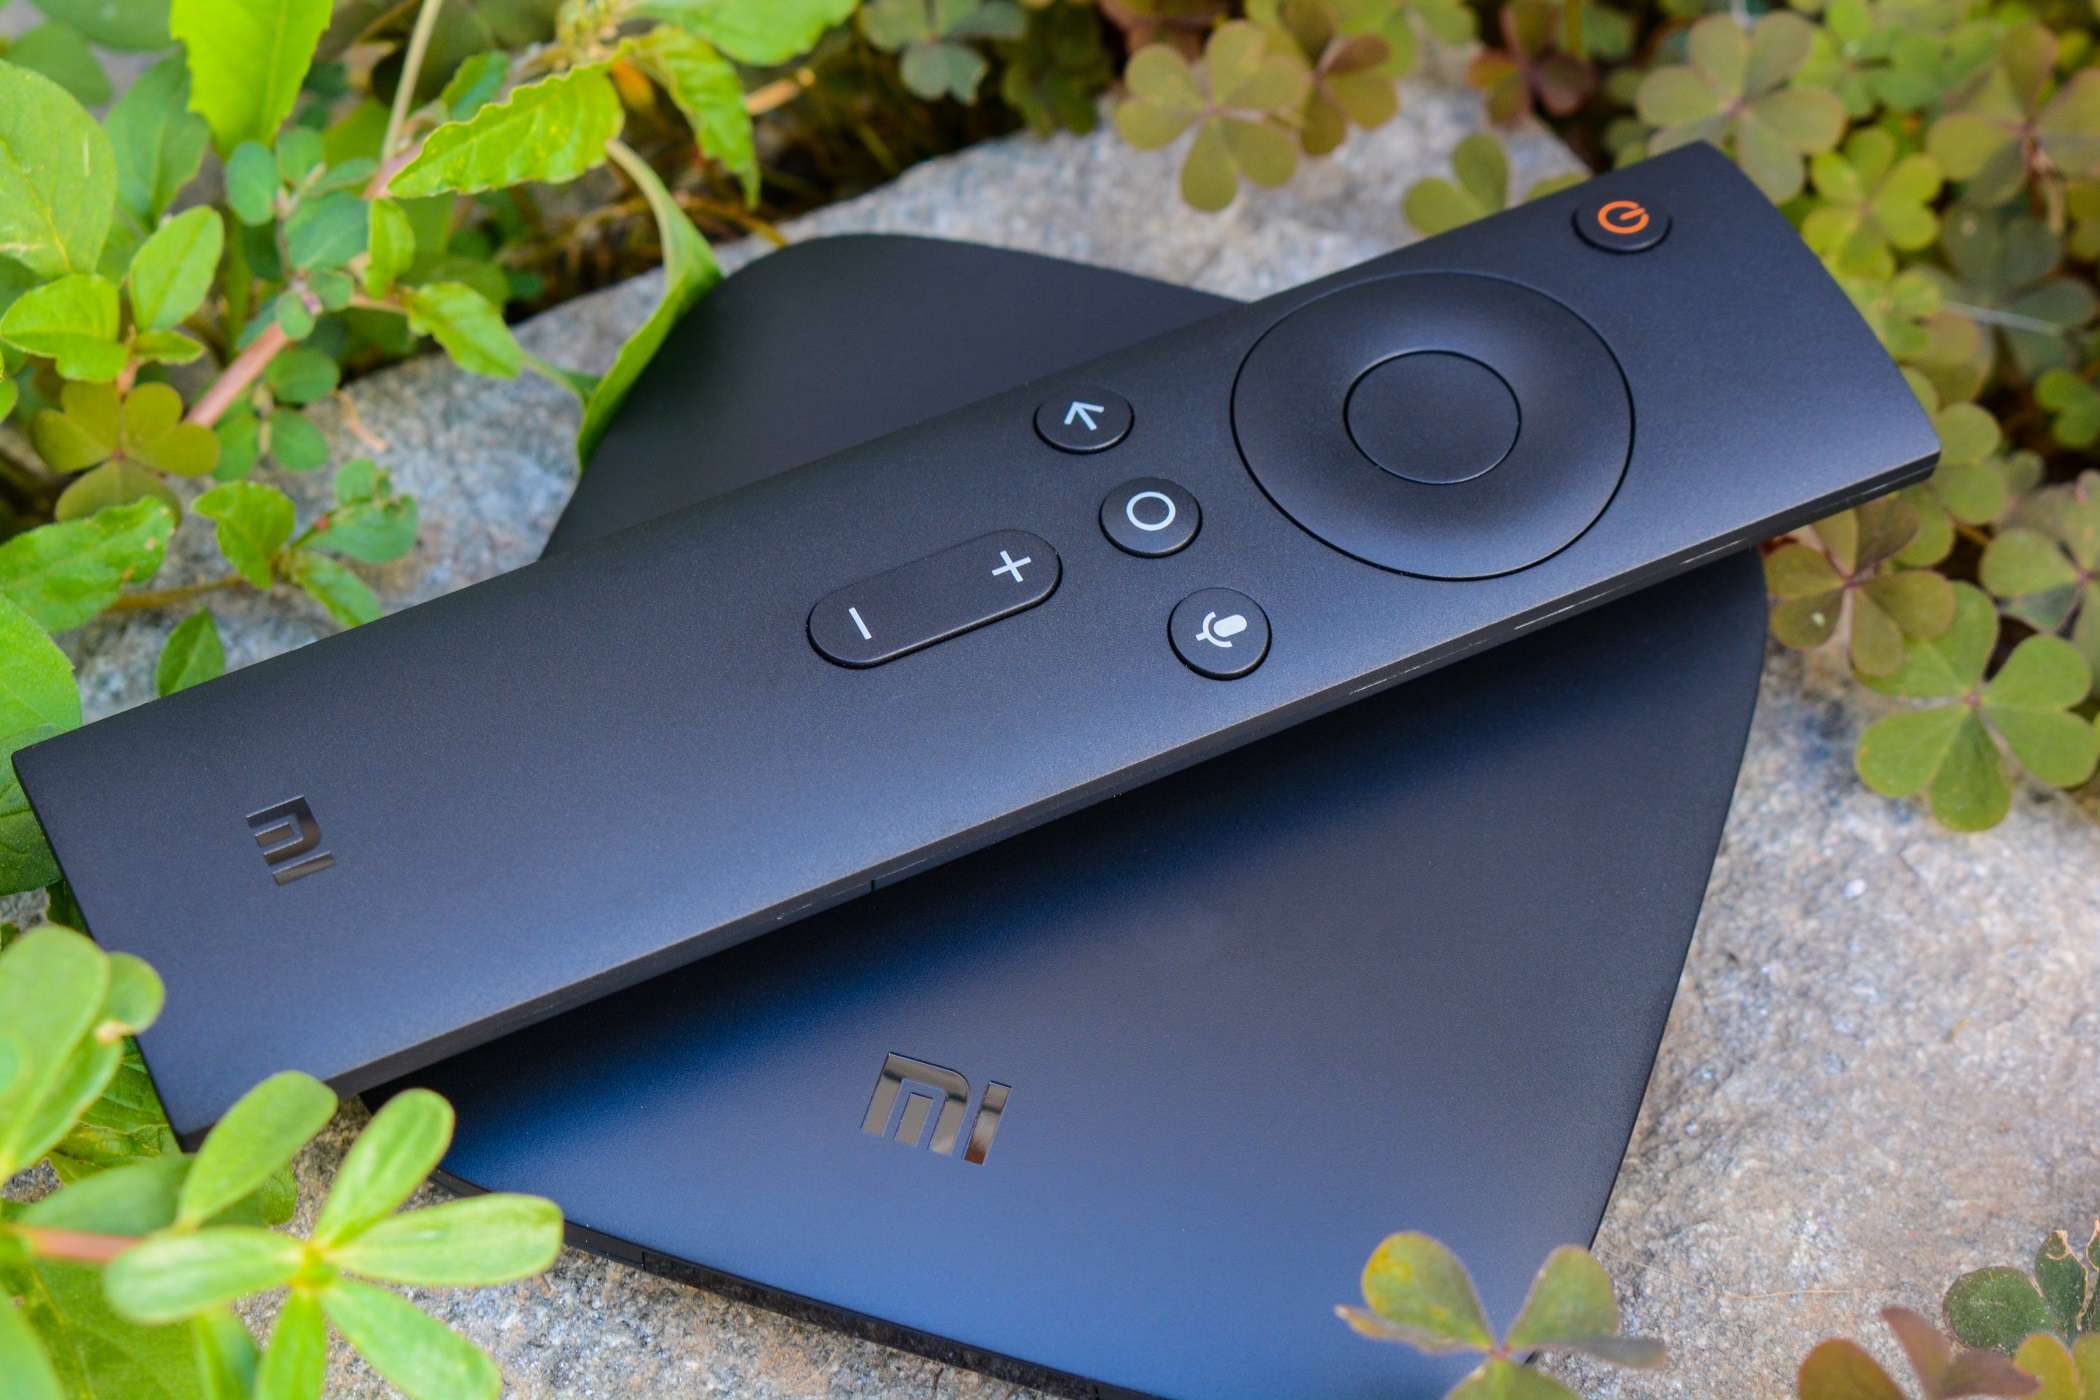 Transferring Files On Xiaomi Box: Step-by-Step Guide